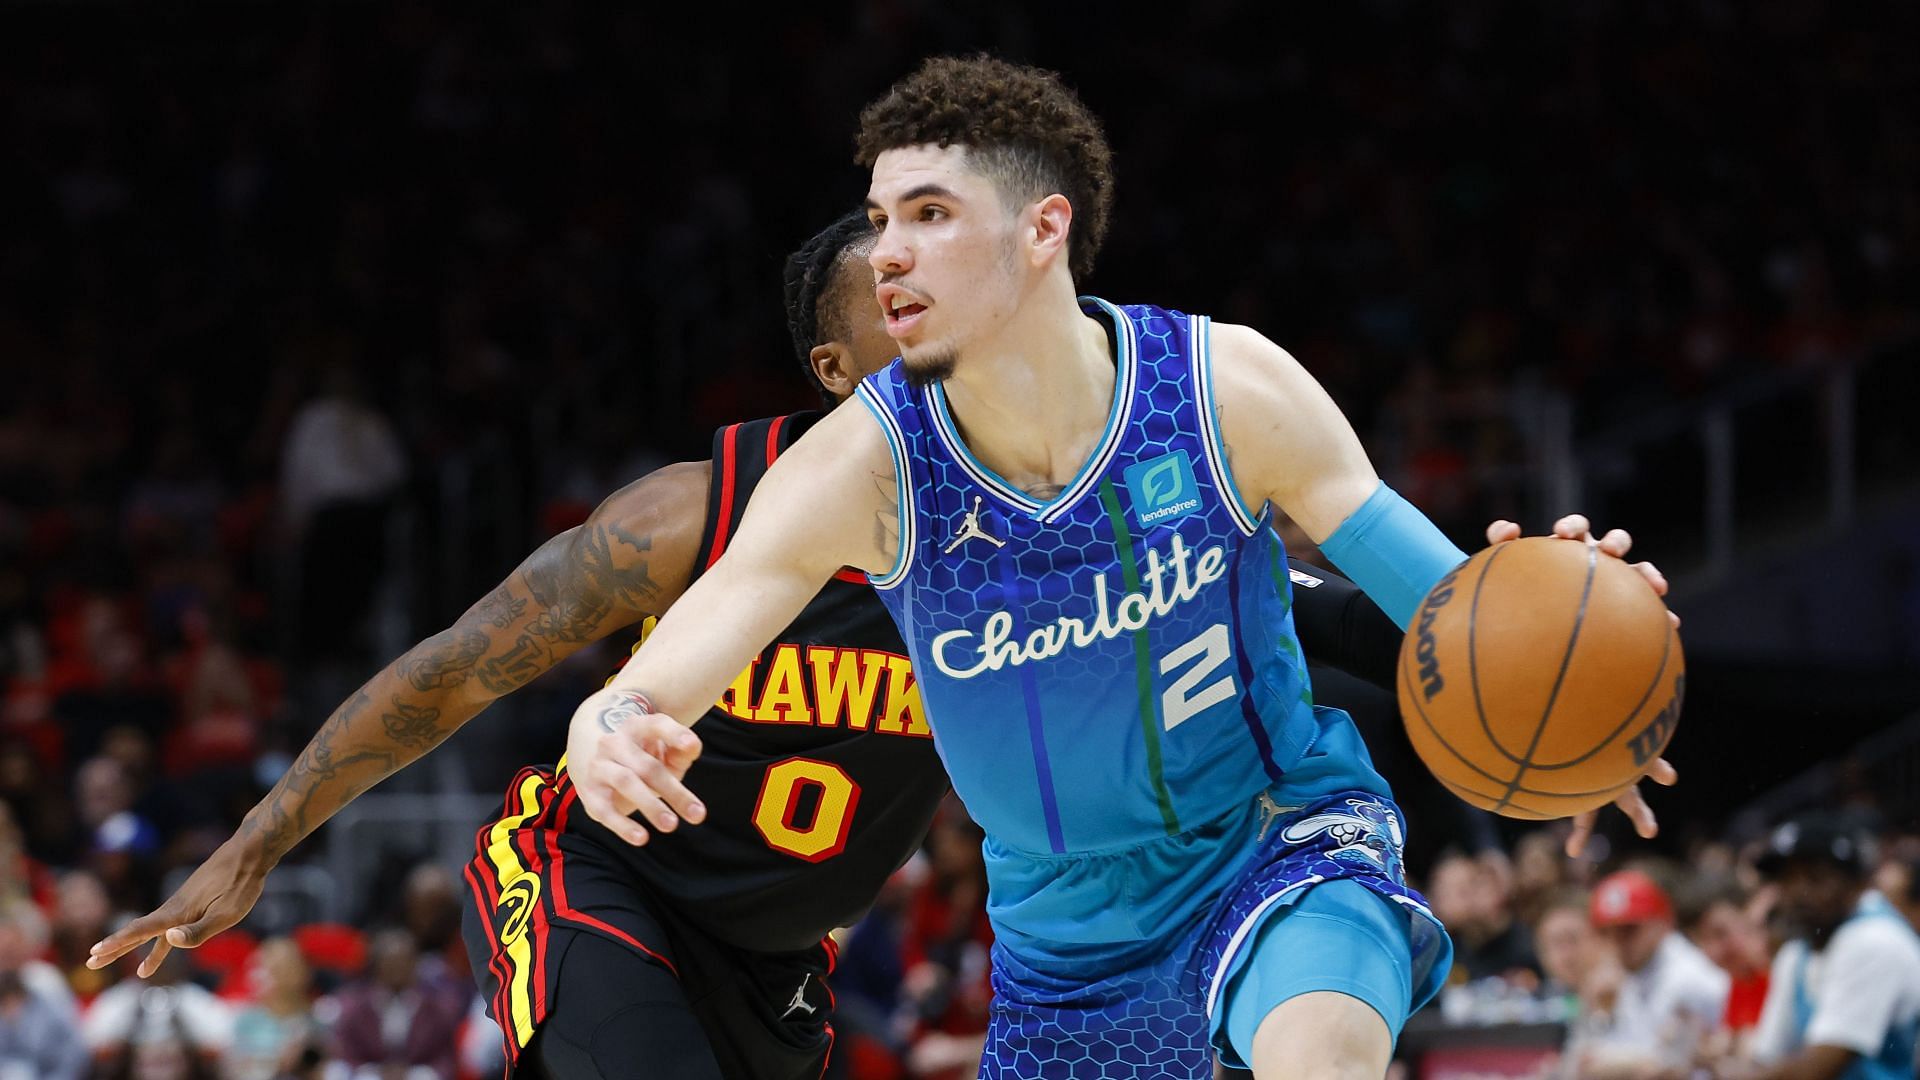 The Hornets will look to make strong impression in the Summer League